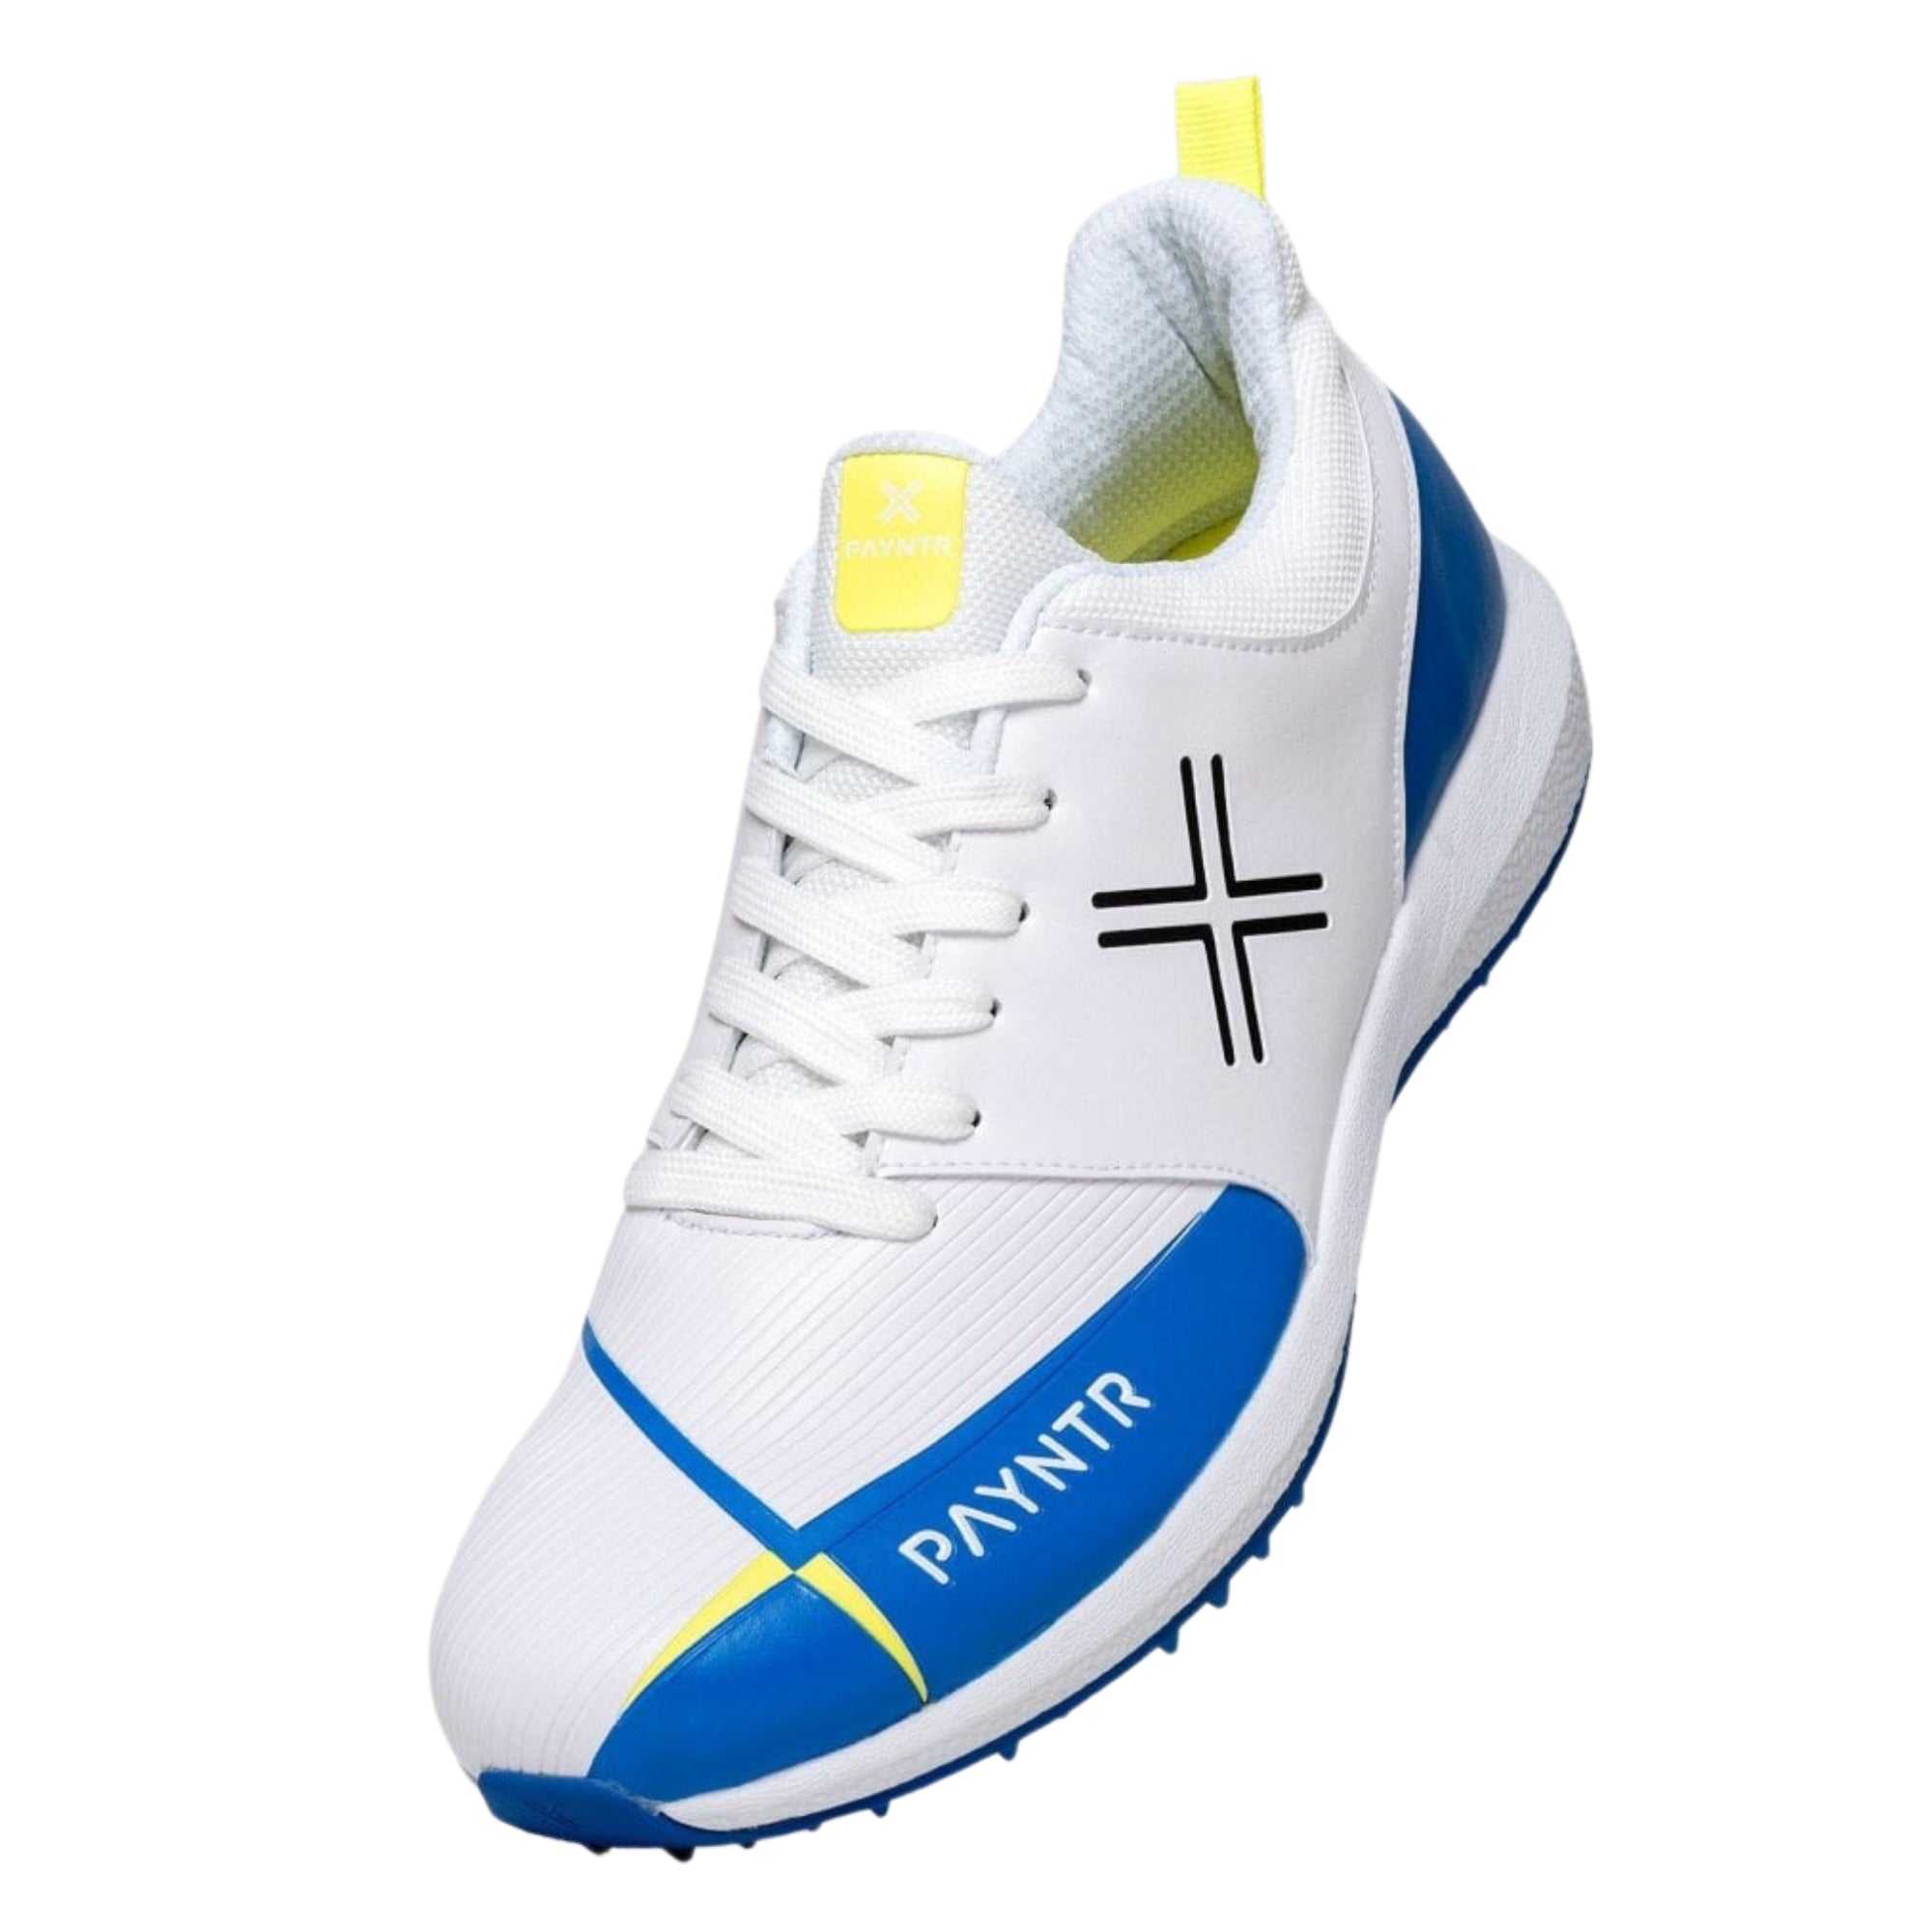 Payntr Cricket Shoes, Model V Pimple - White/Blue All Rounder Cricket Shoes